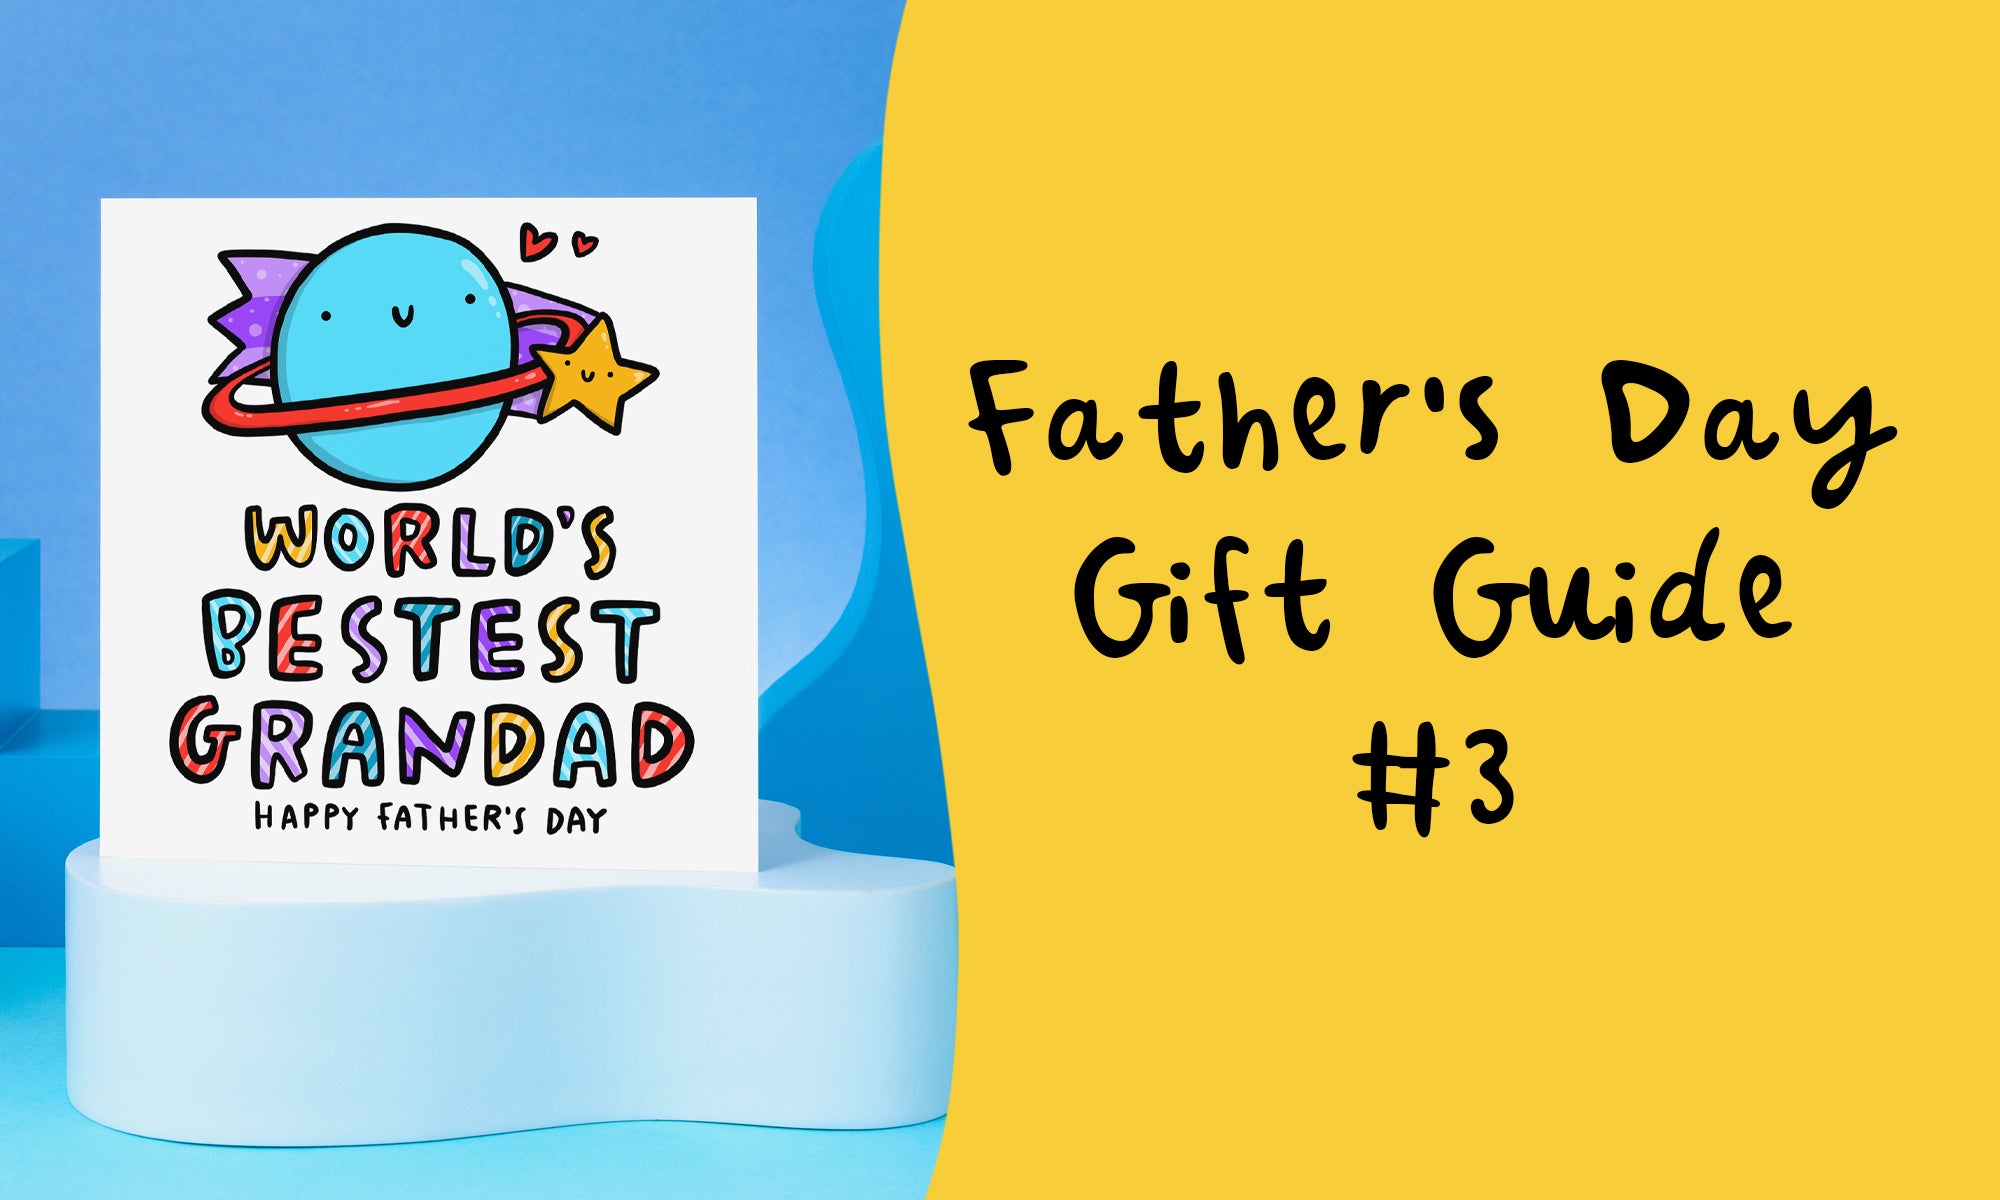 Father's Day Gift Guide #3